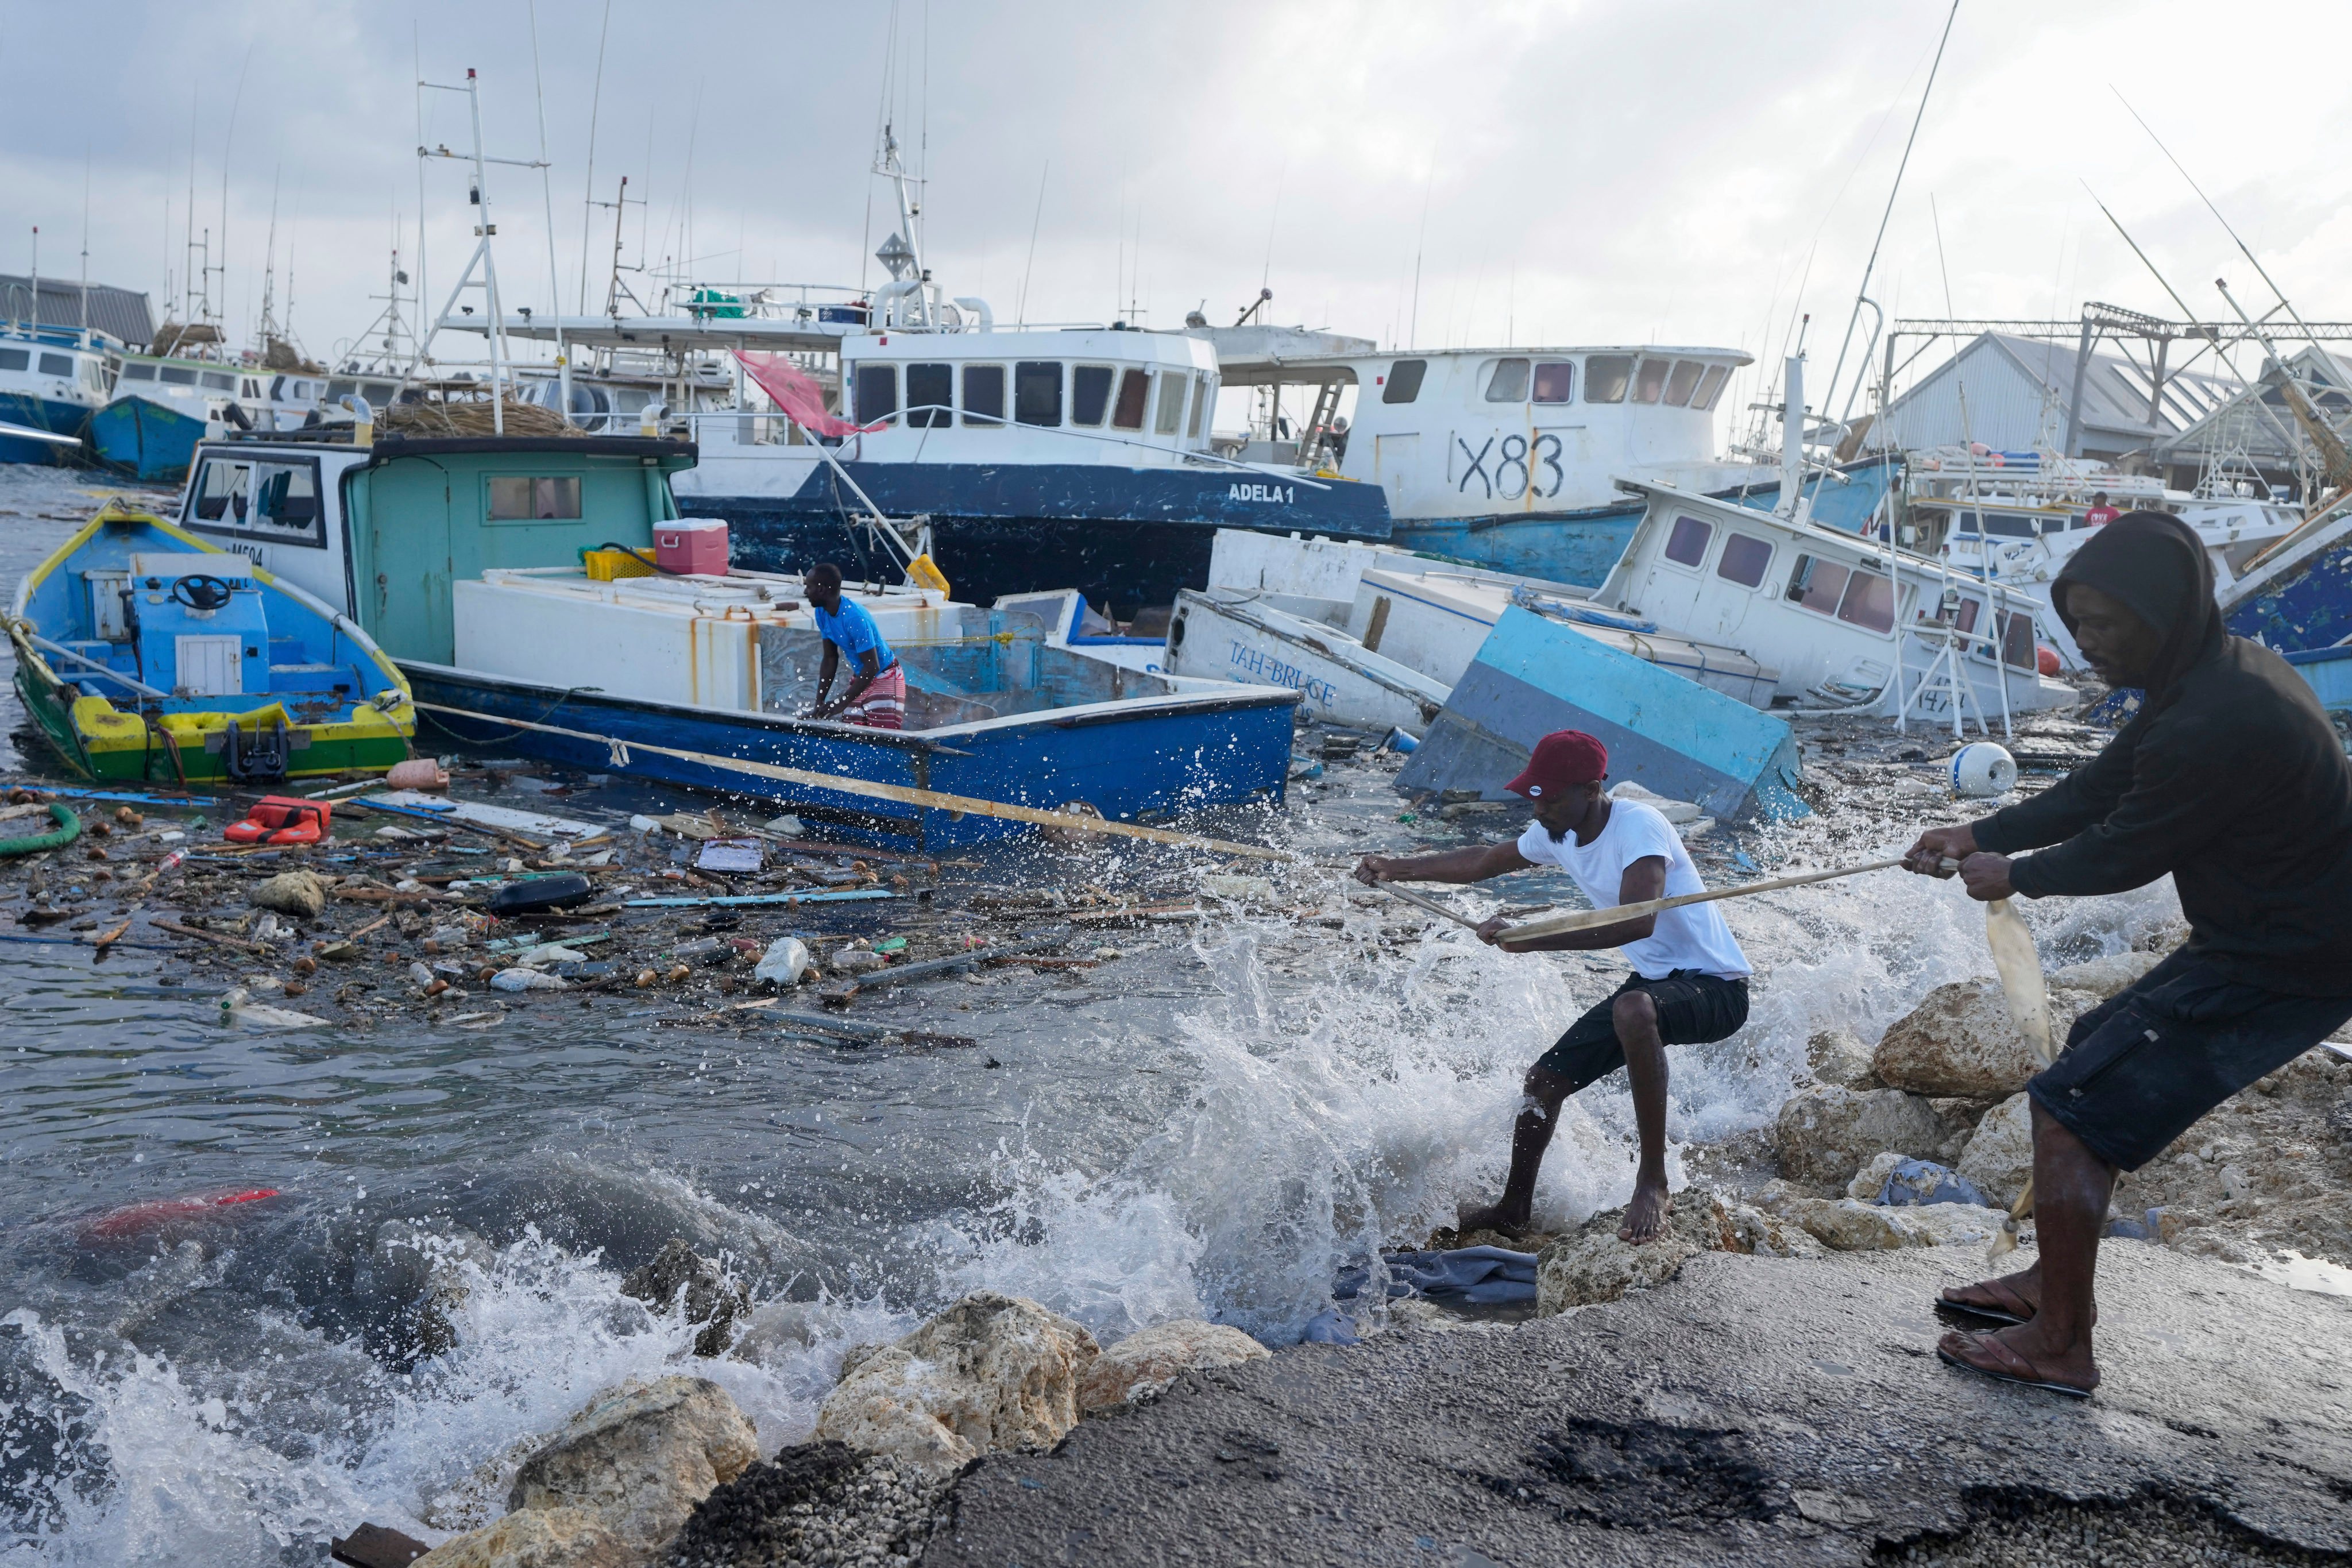 Fishermen pull a boat damaged by Hurricane Beryl back to the dock at the Bridgetown Fisheries in Barbados on Monday. Photo: AP